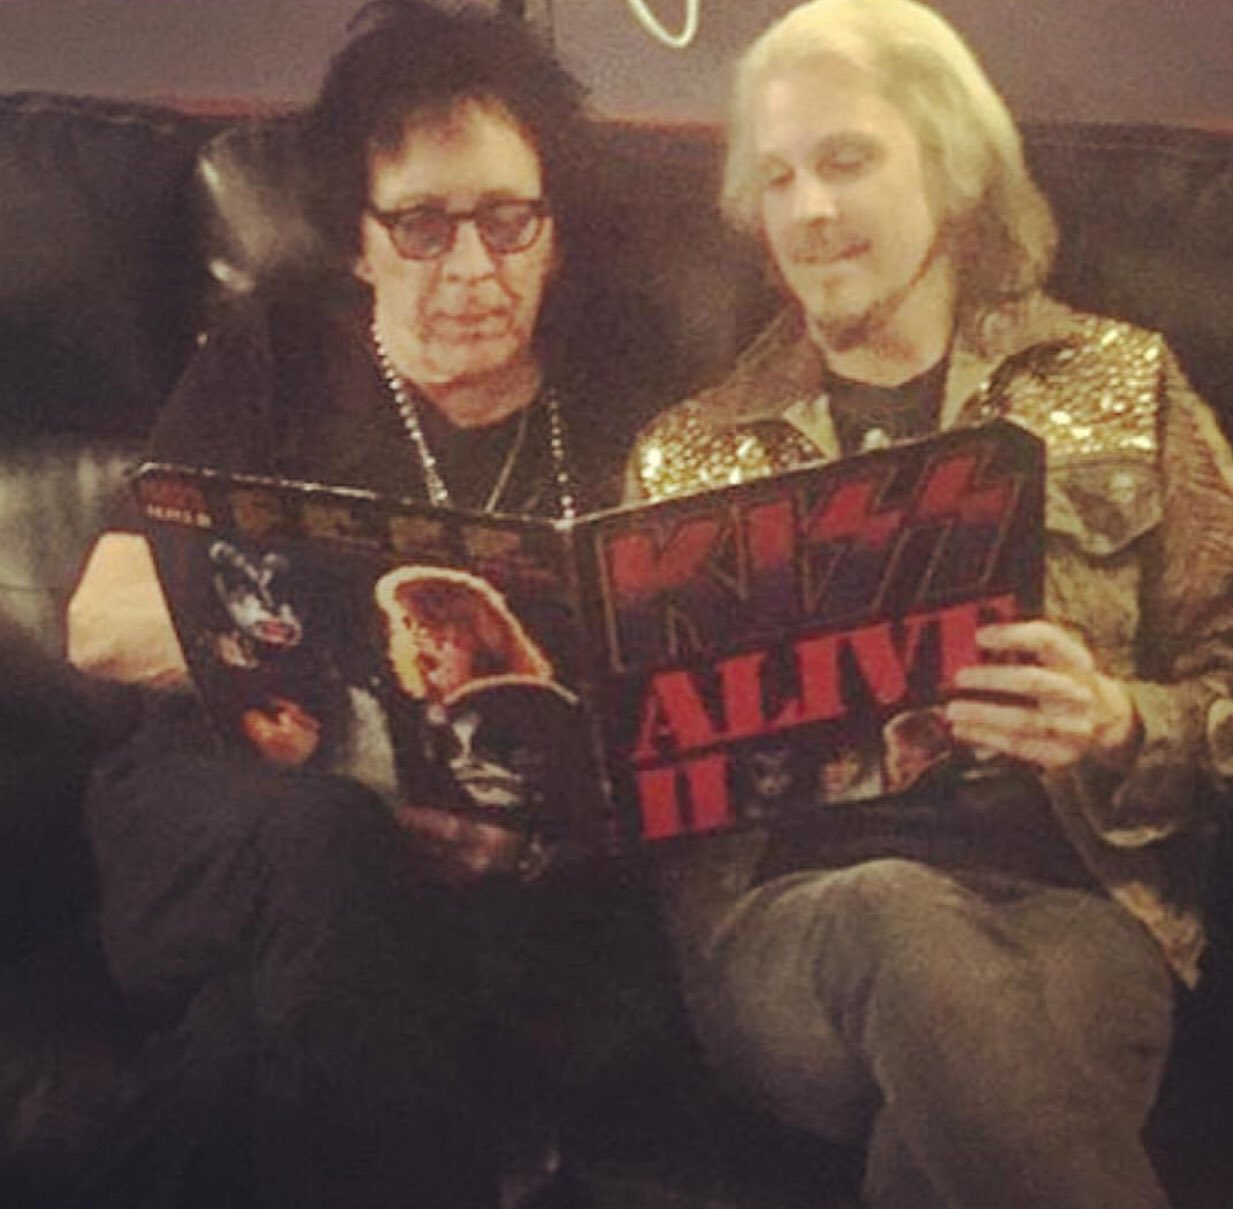 Happy birthday to my long time friend Peter Criss  